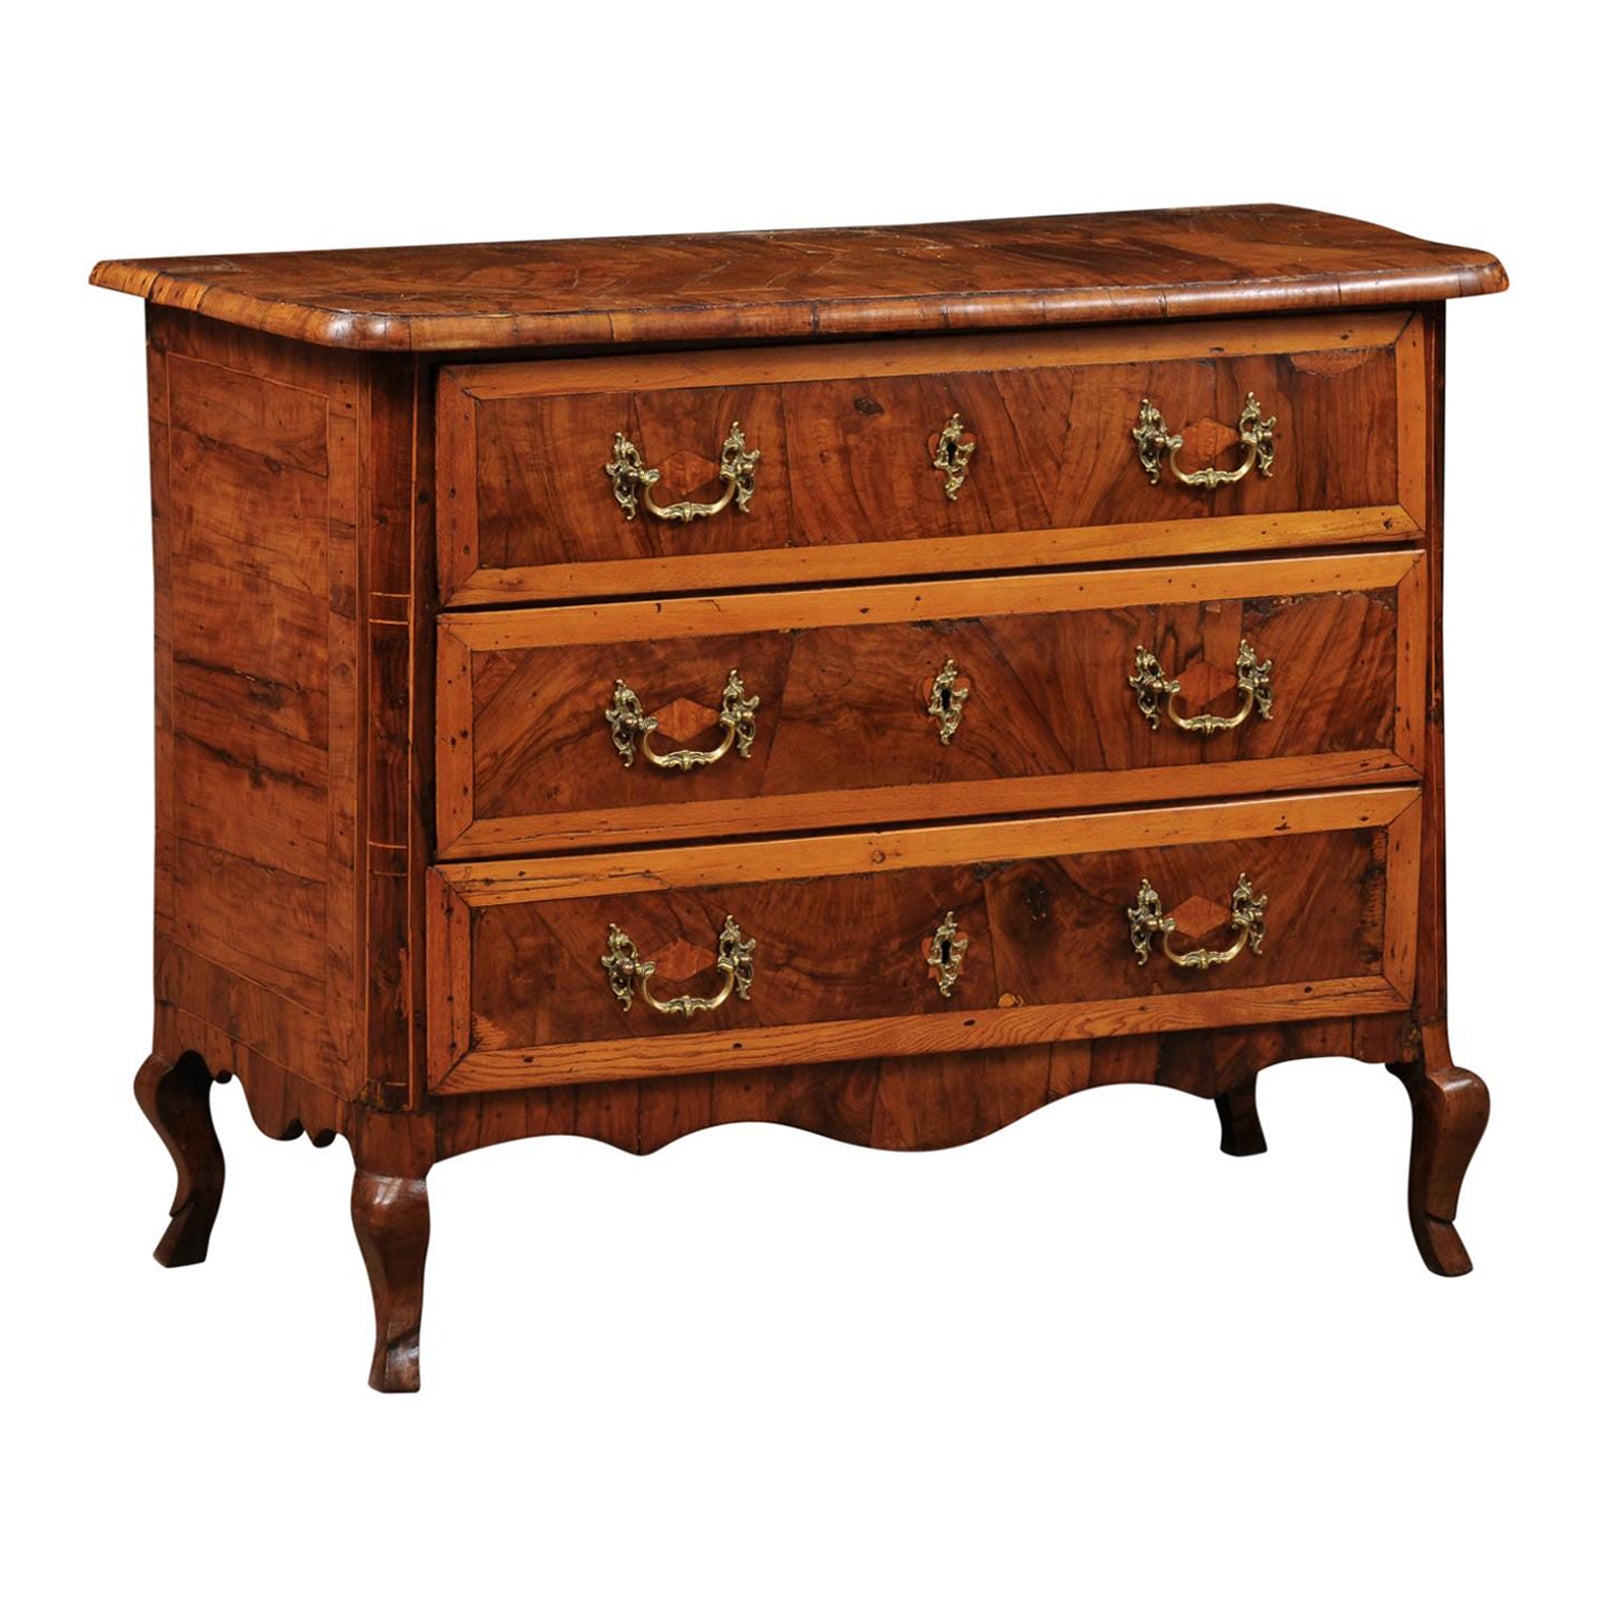 18th Century Italian 3-Drawer Commode in Olivewood with Cabriole Legs For Sale